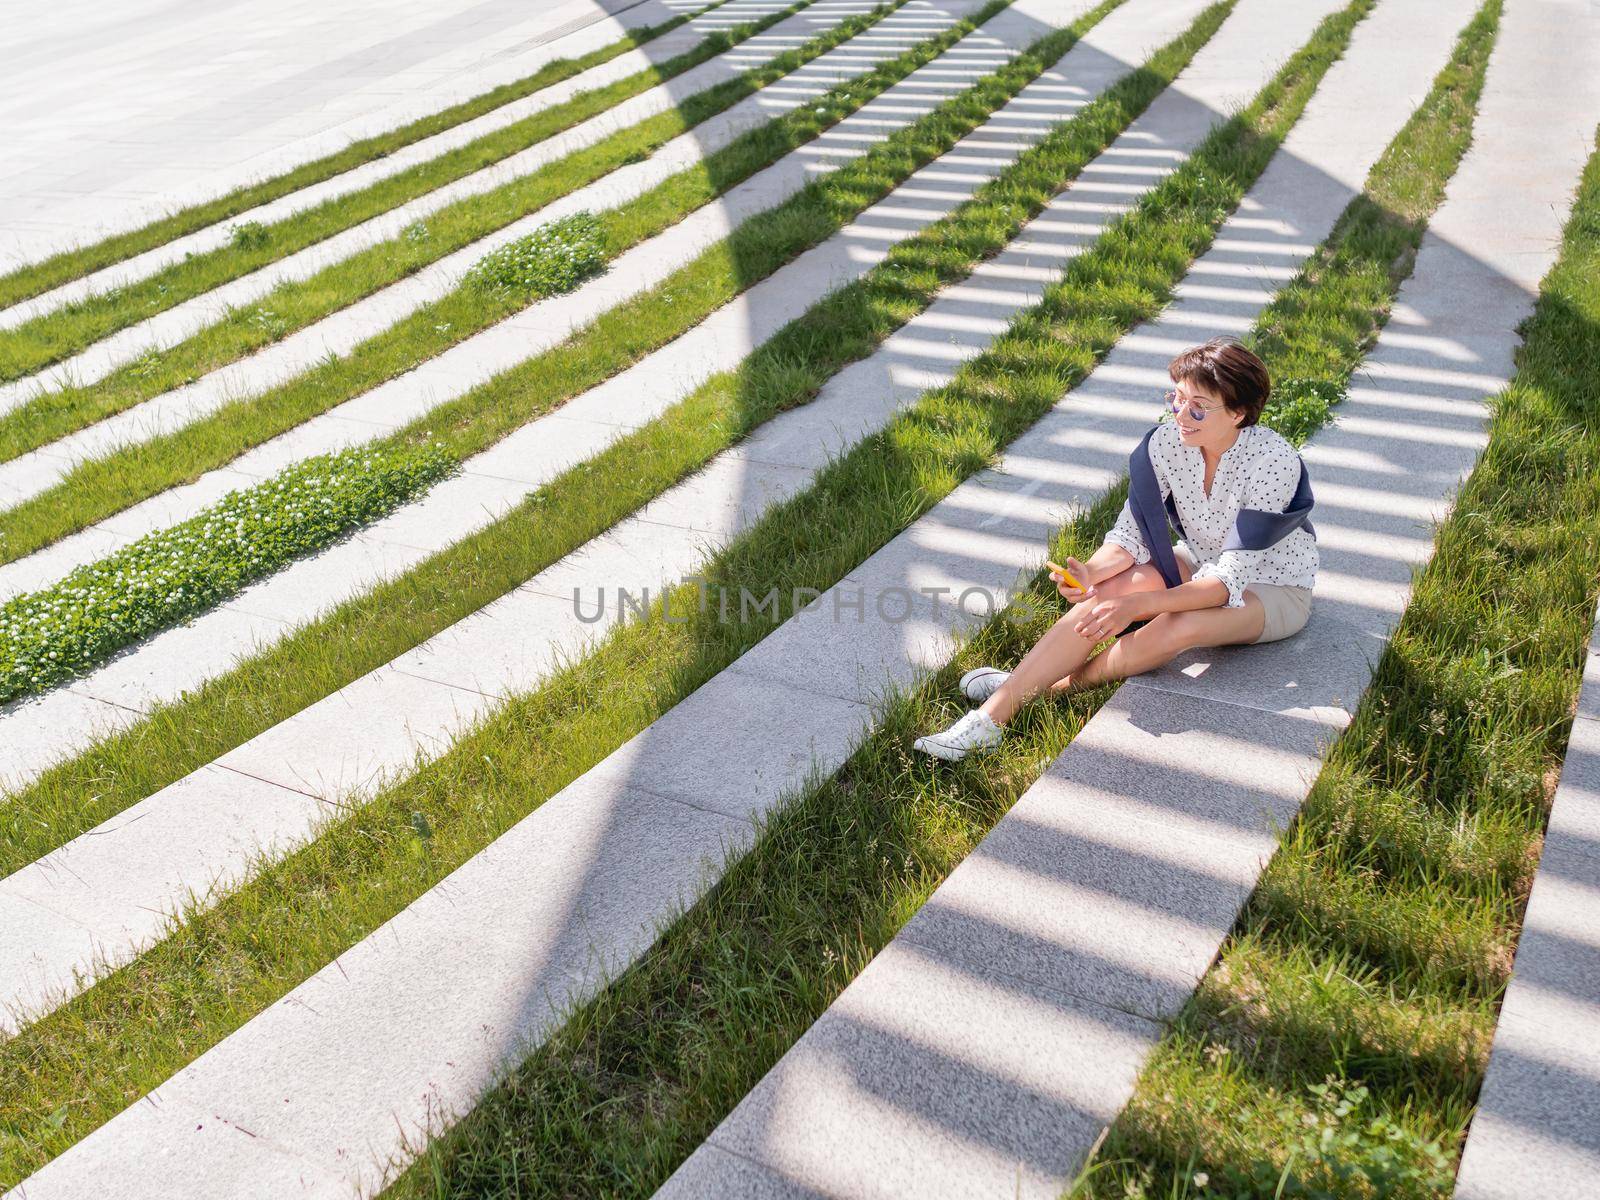 Woman texting in her smartphone while sits on bench in urban park. Striped shadow on green lawn. Modern lifestyle of millennials.